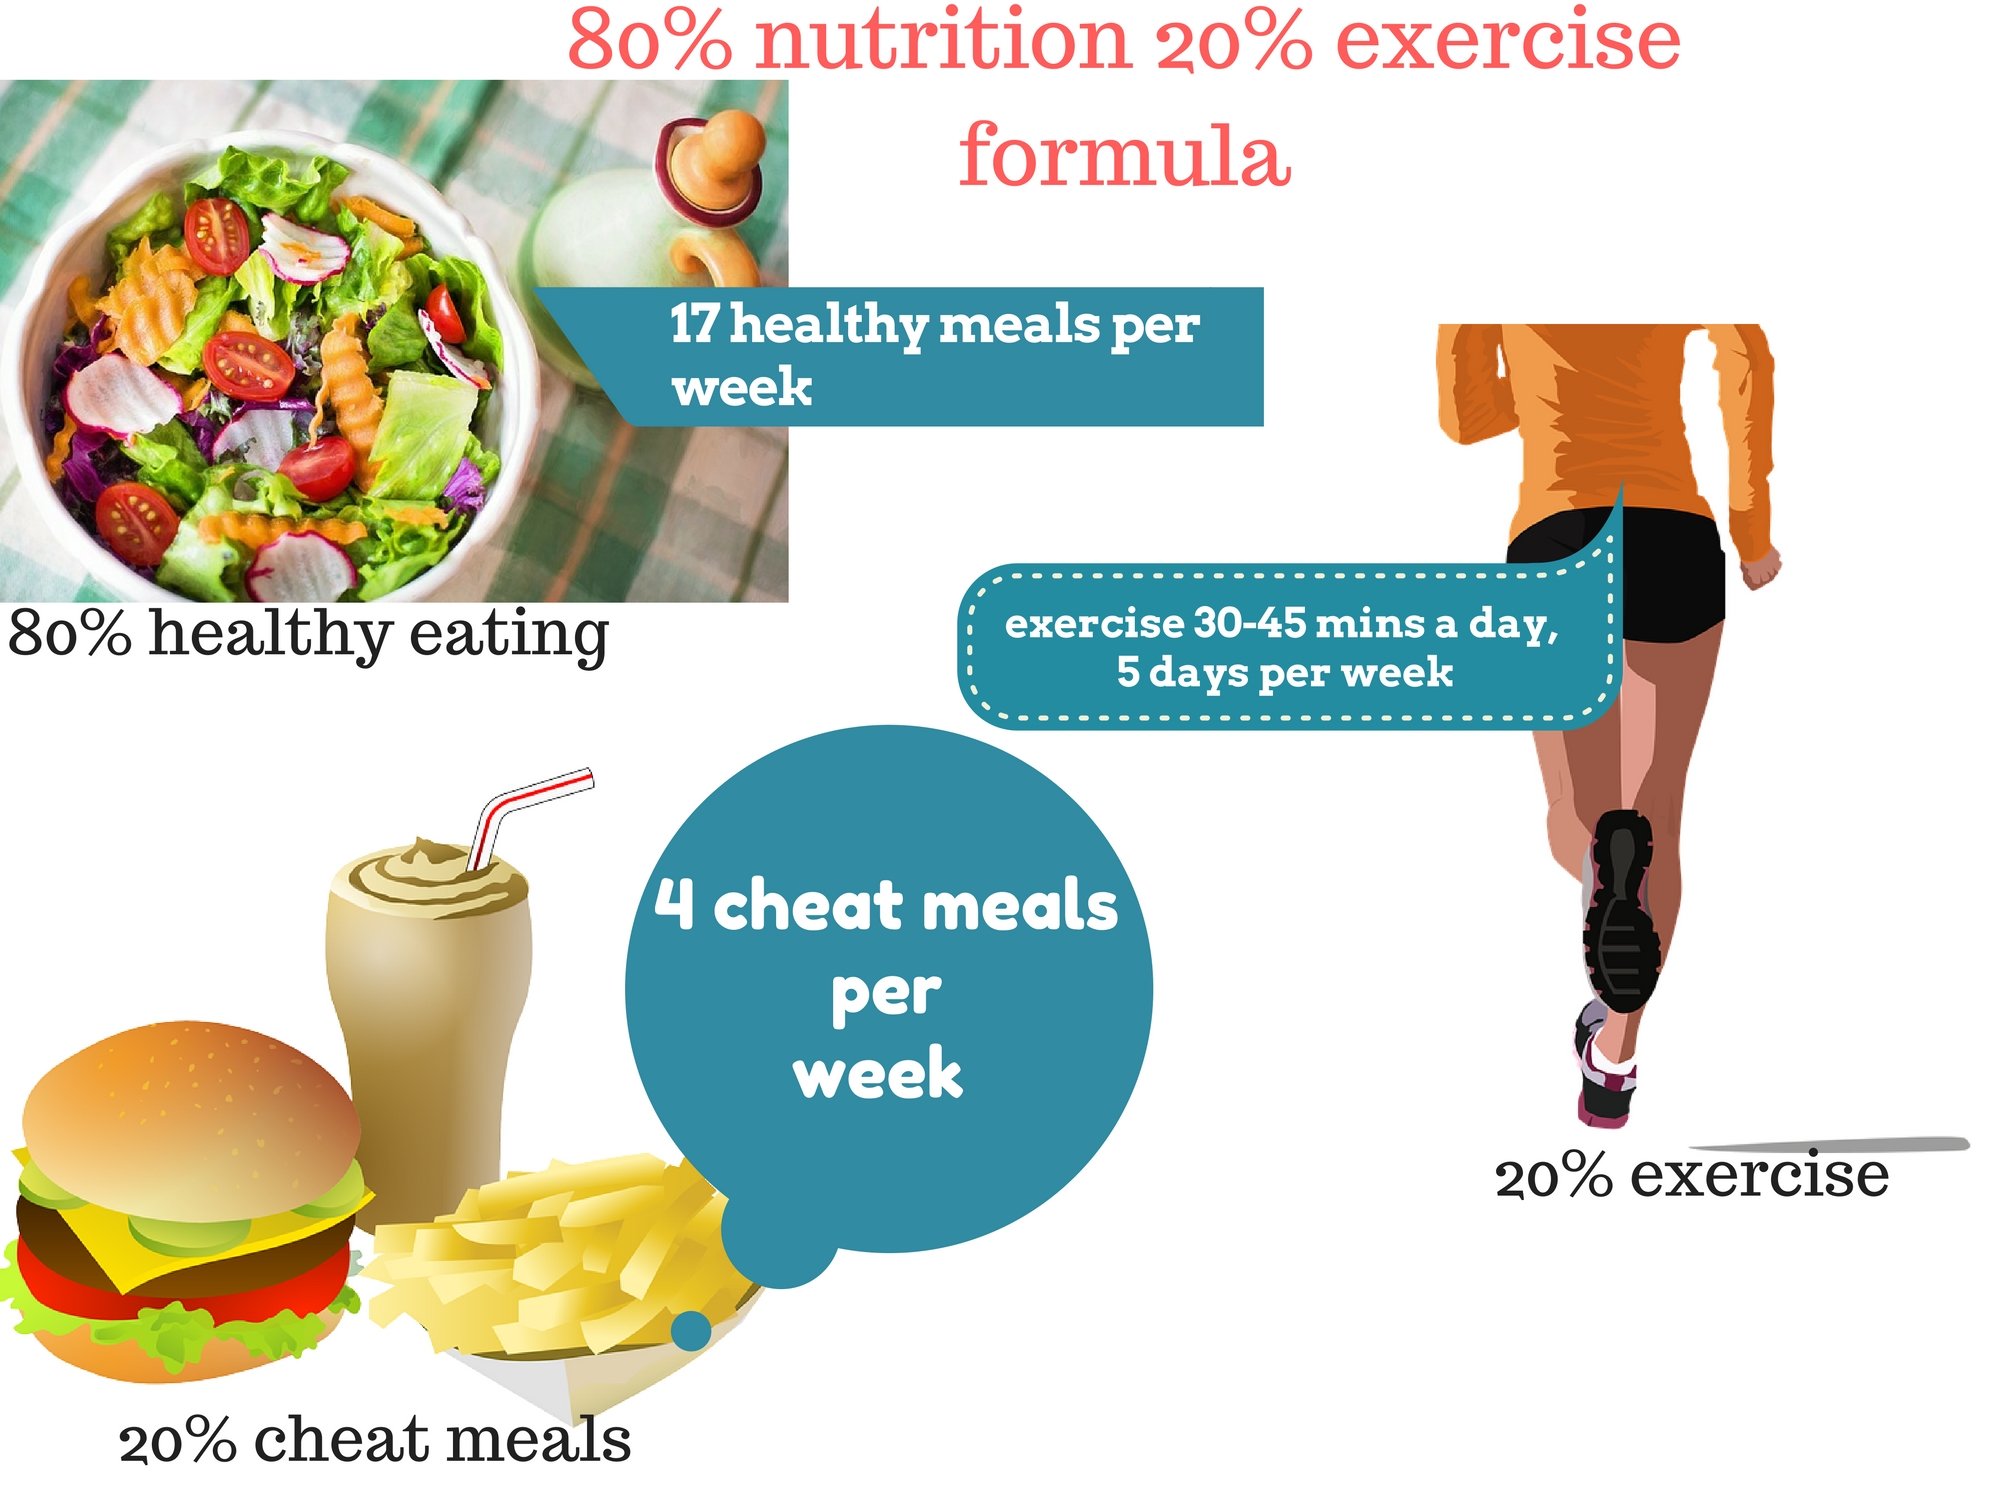 80 nutrition 20 exercise